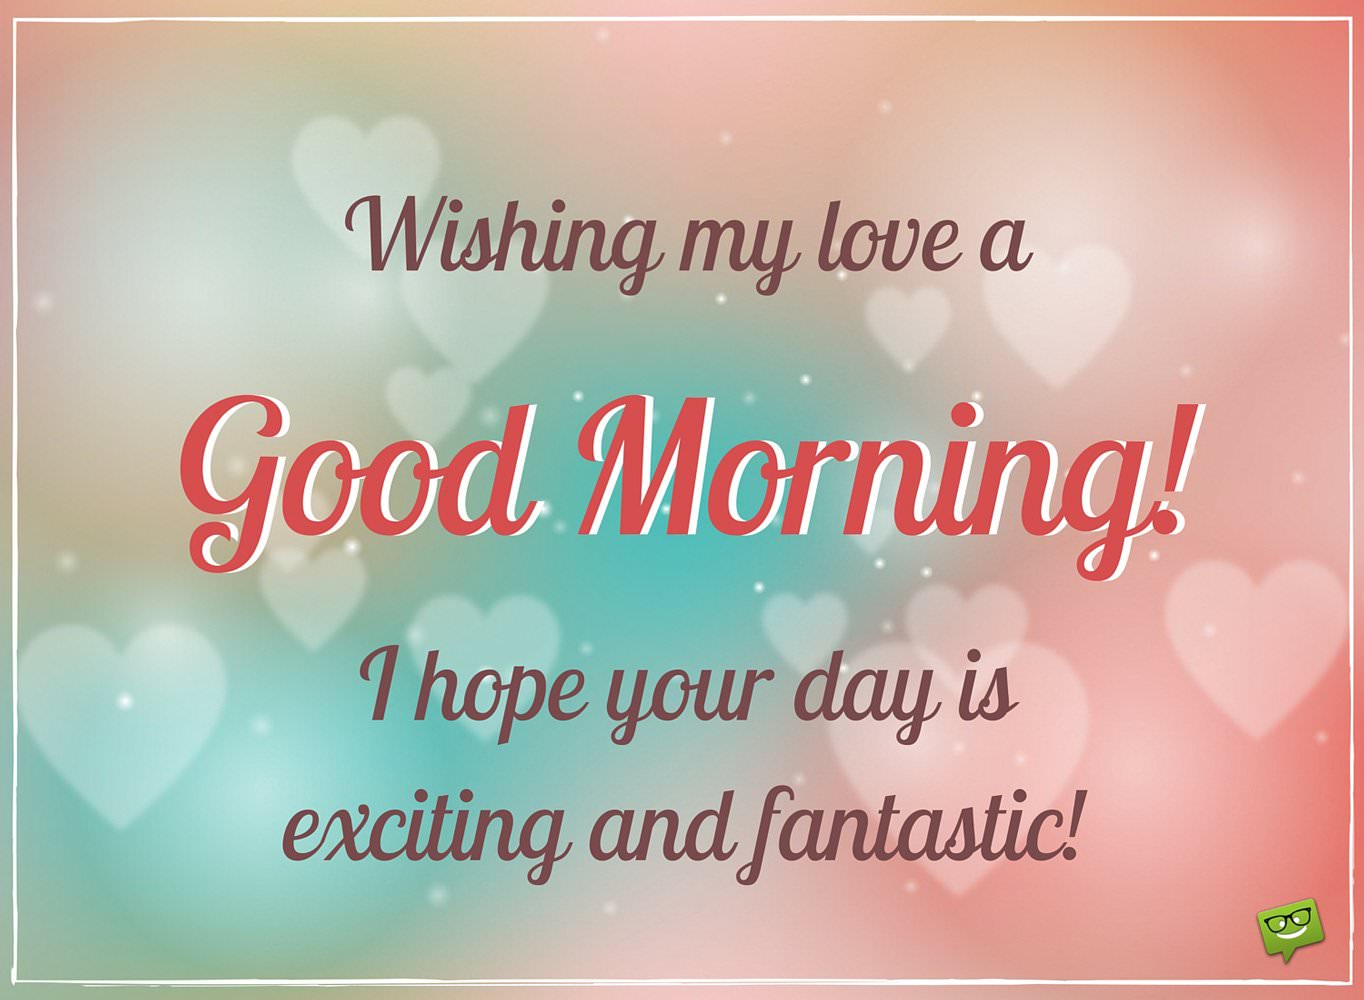 Wishing my love a Good Morning I hope your day is exciting and fantastic